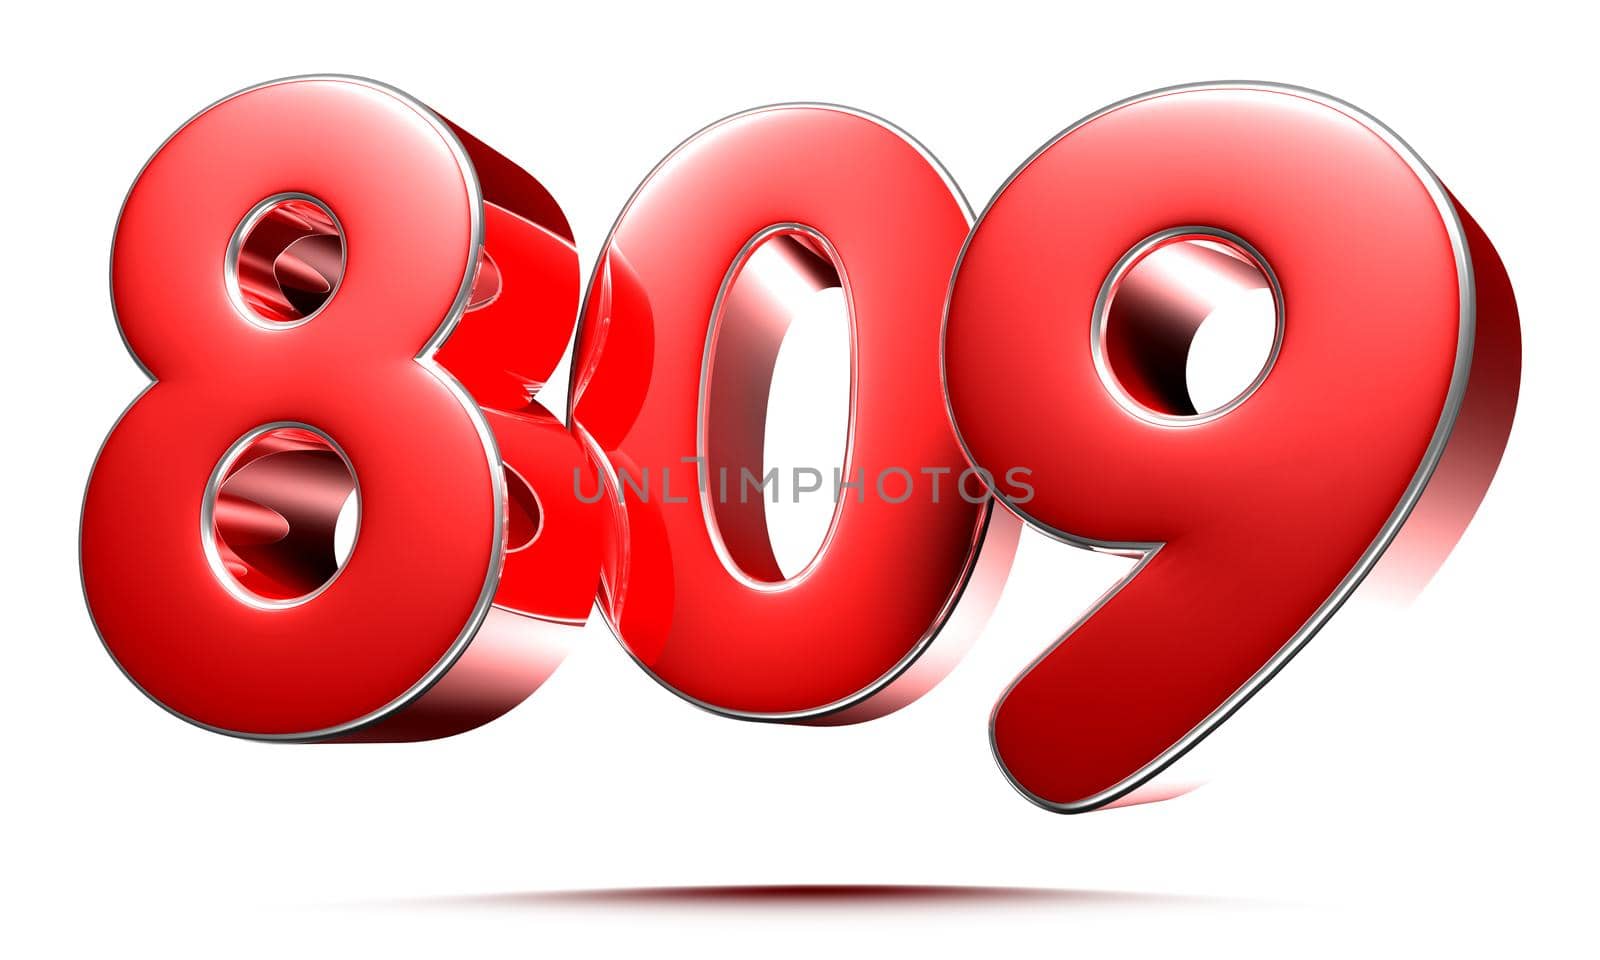 Rounded red numbers 809 on white background 3D illustration with clipping path